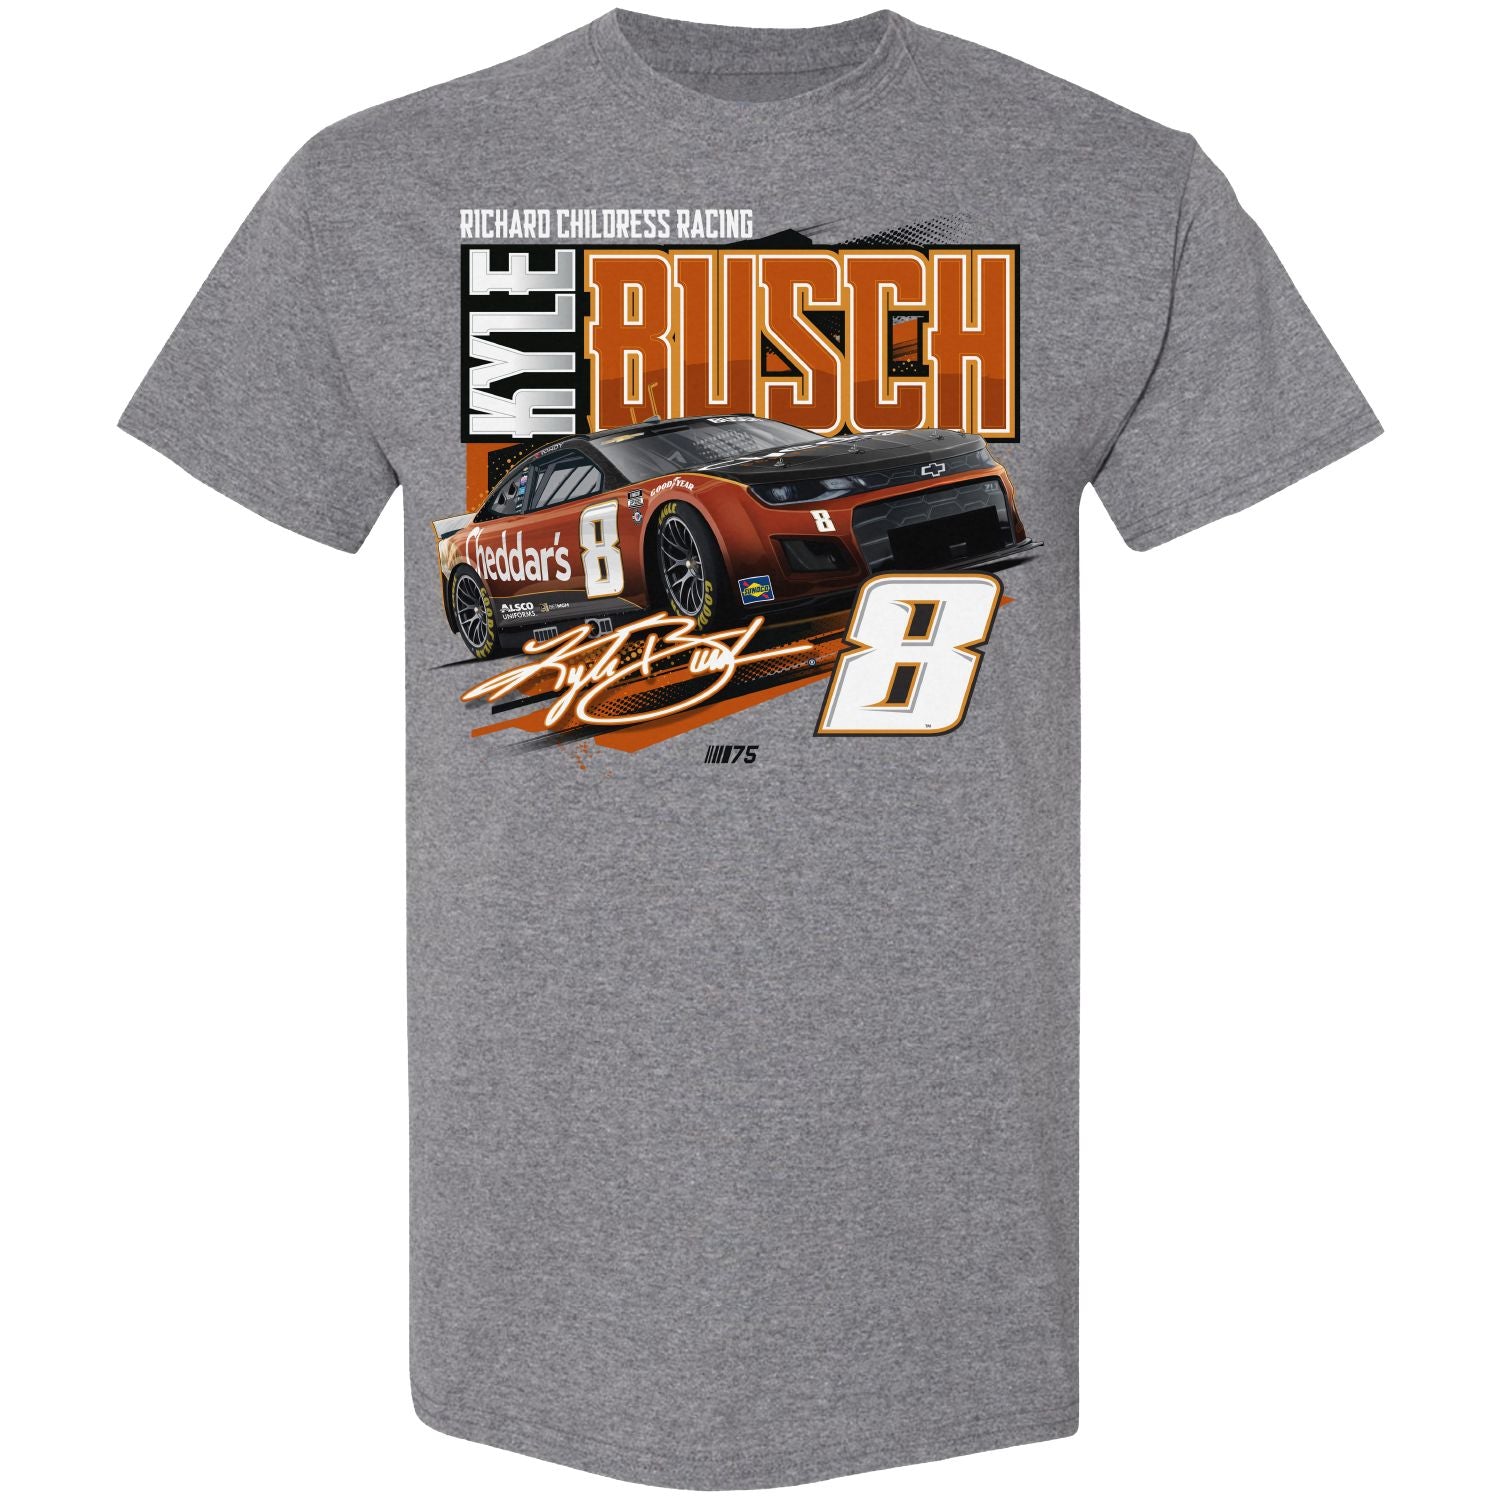 KYLE BUSCH #8 CHEDDAR'S PIT ROAD TEE